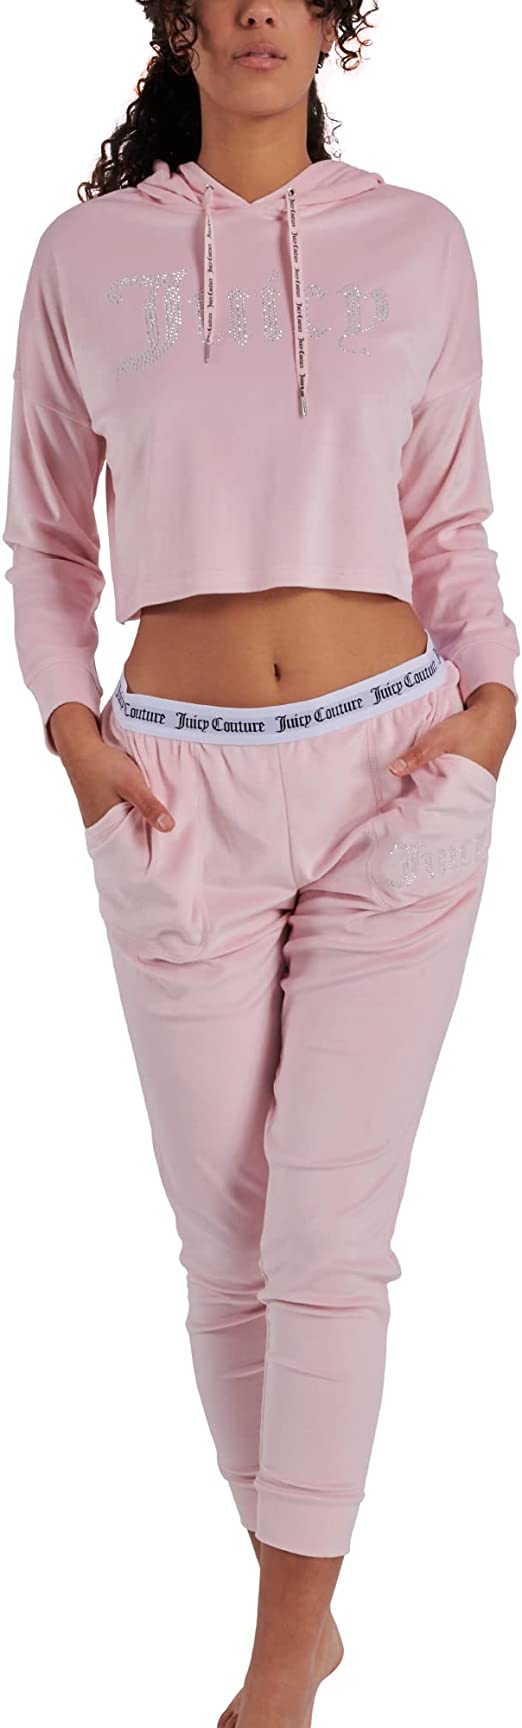 Juicy Couture 1X Plus Size Pink Logo Velour Tracksuit Set - Hoodie And  Pants